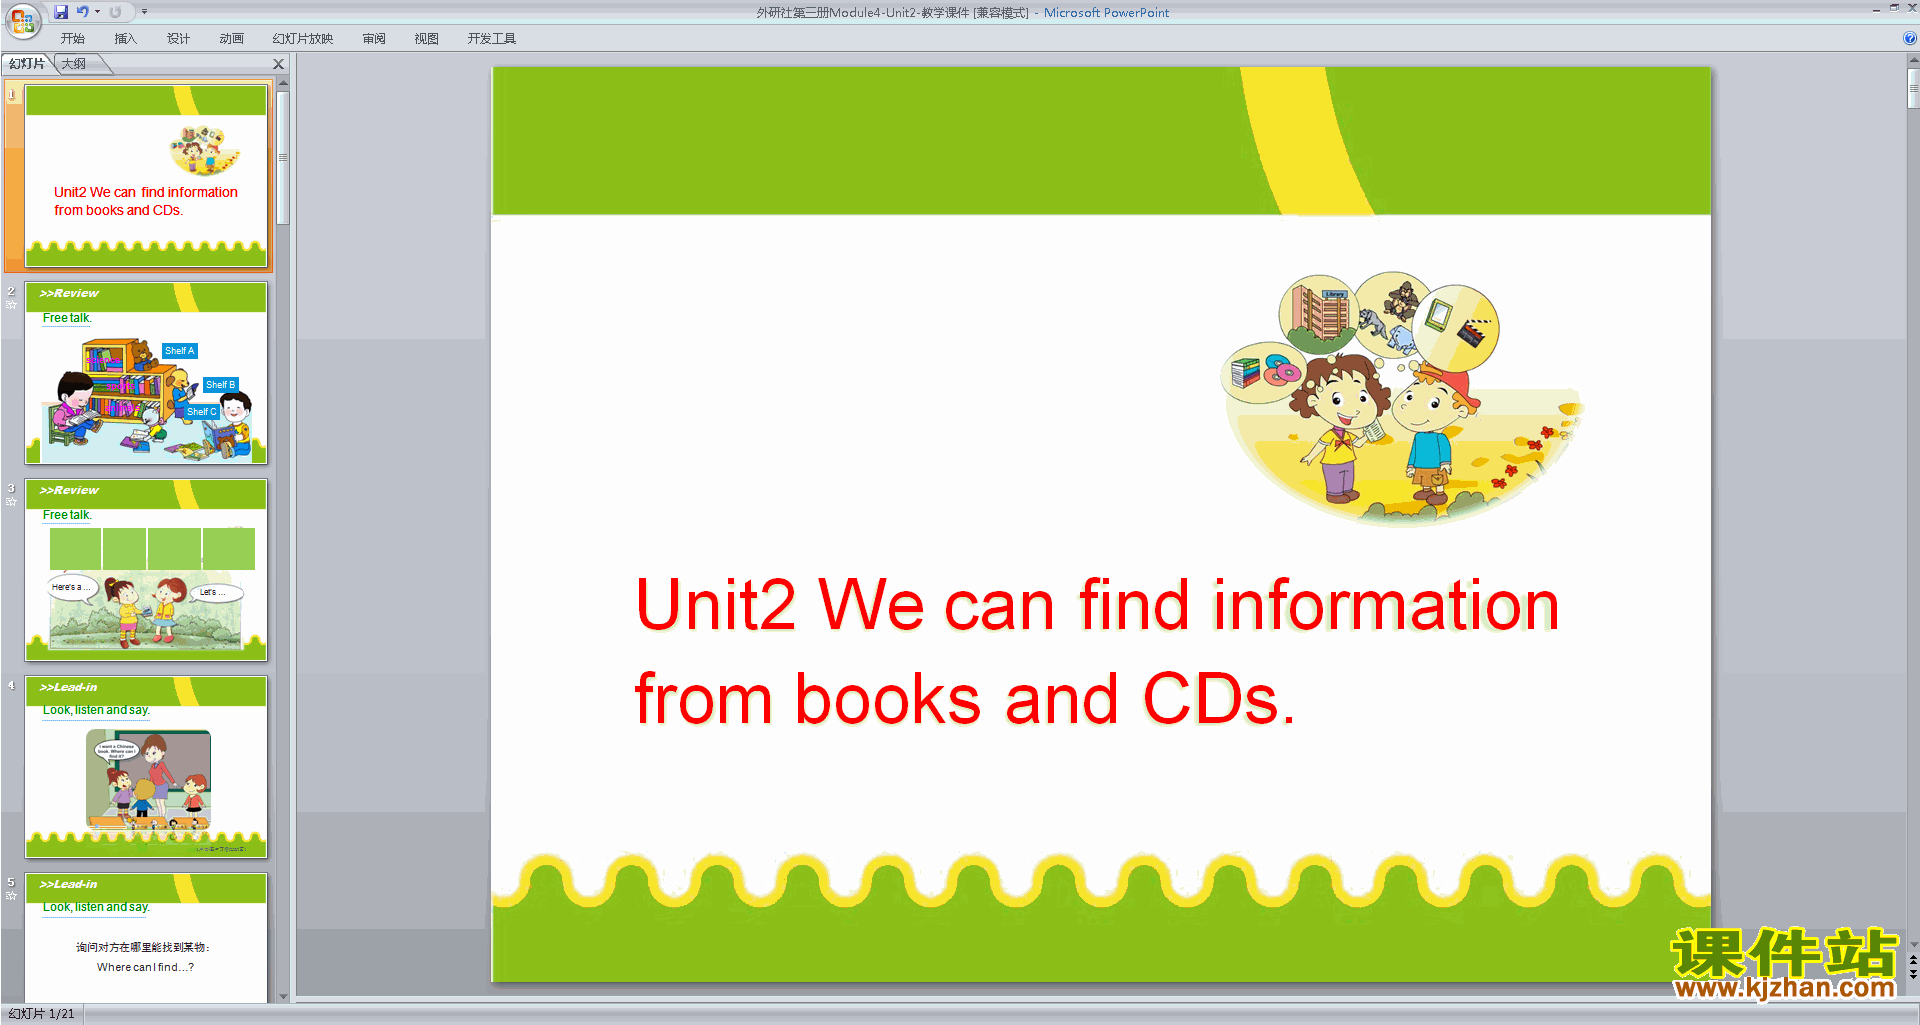 We can find information from books and CDsμ